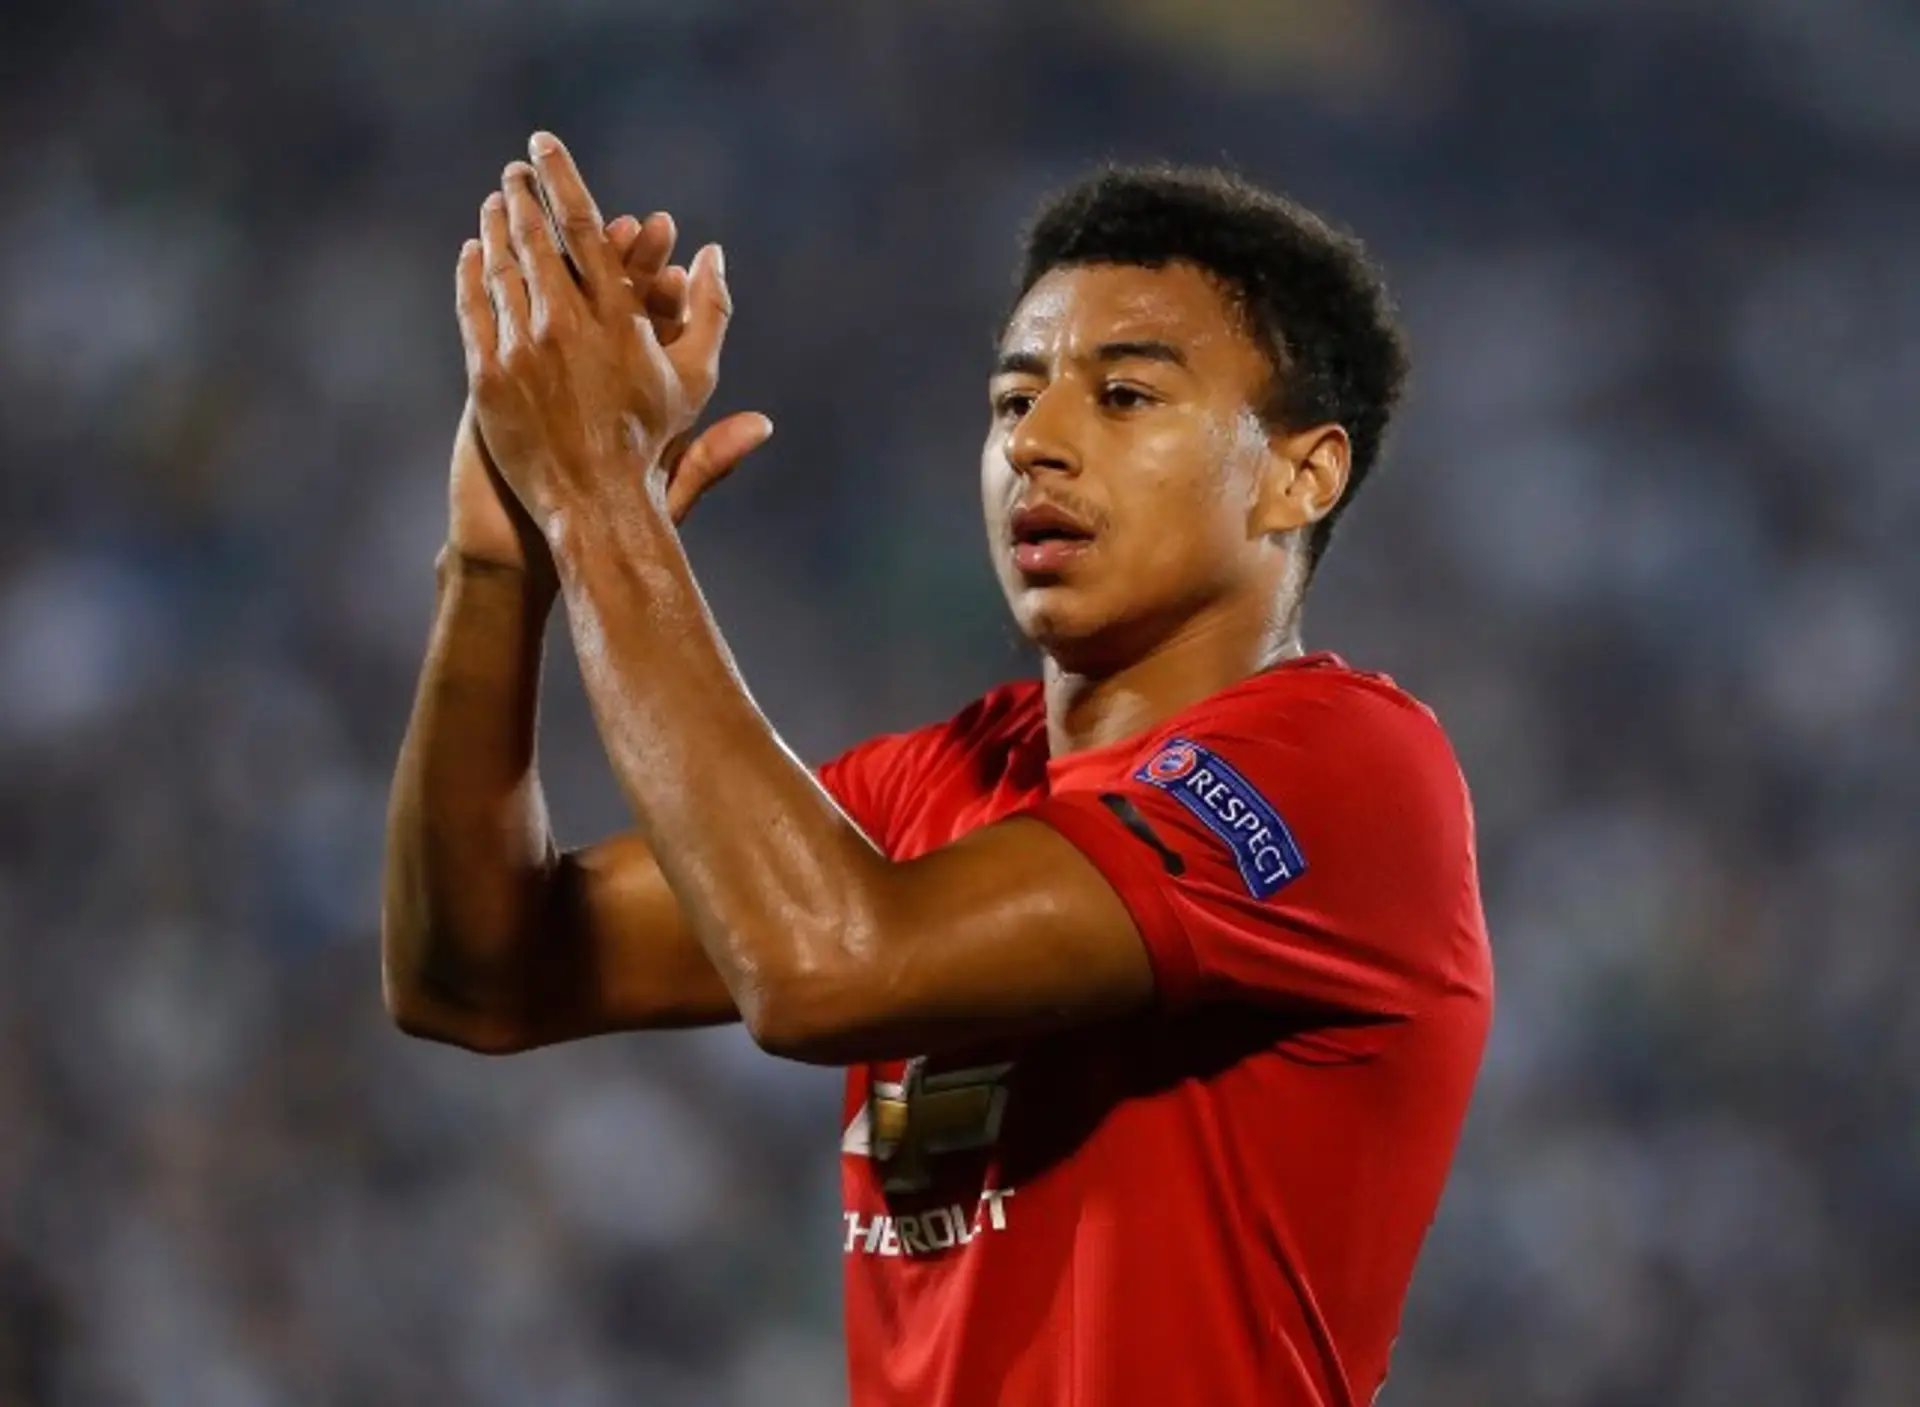 What's next for Jesse Lingard?